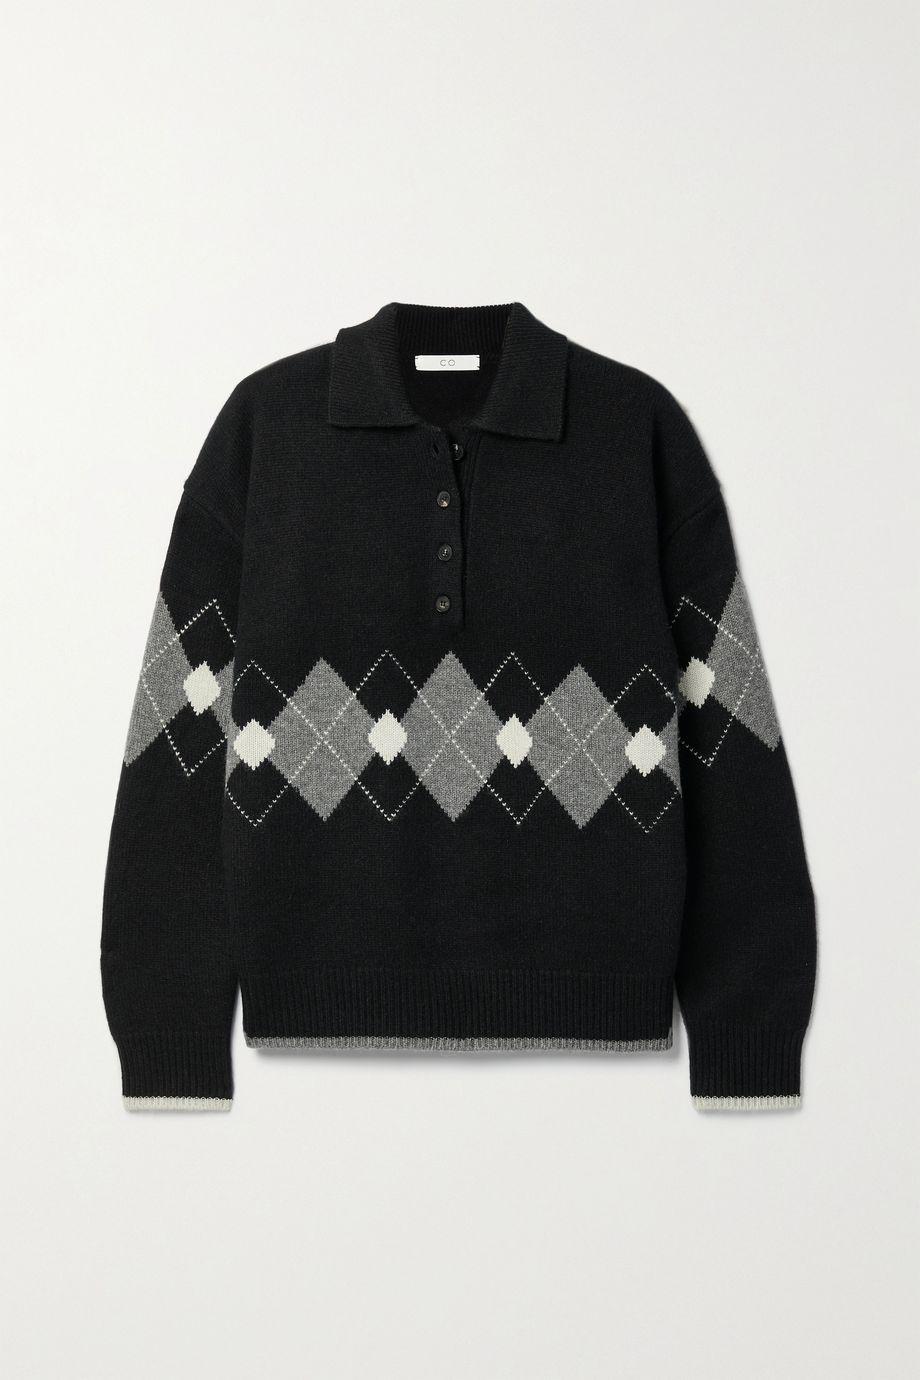 Argyle cashmere polo sweater by CO